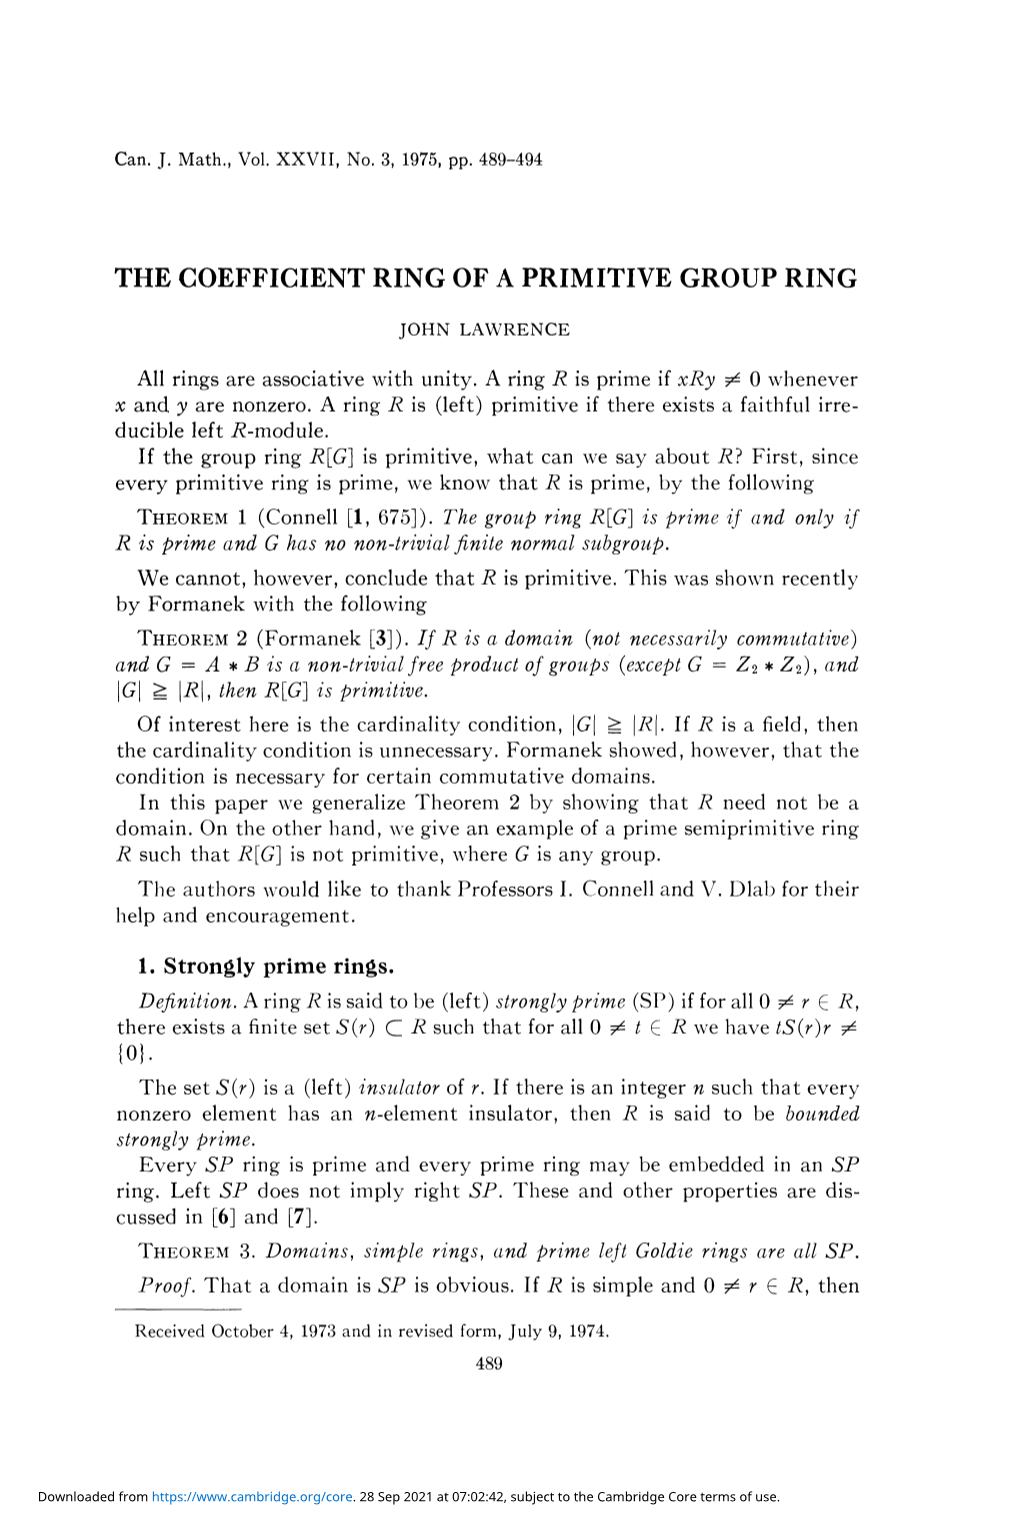 The Coefficient Ring of a Primitive Group Ring